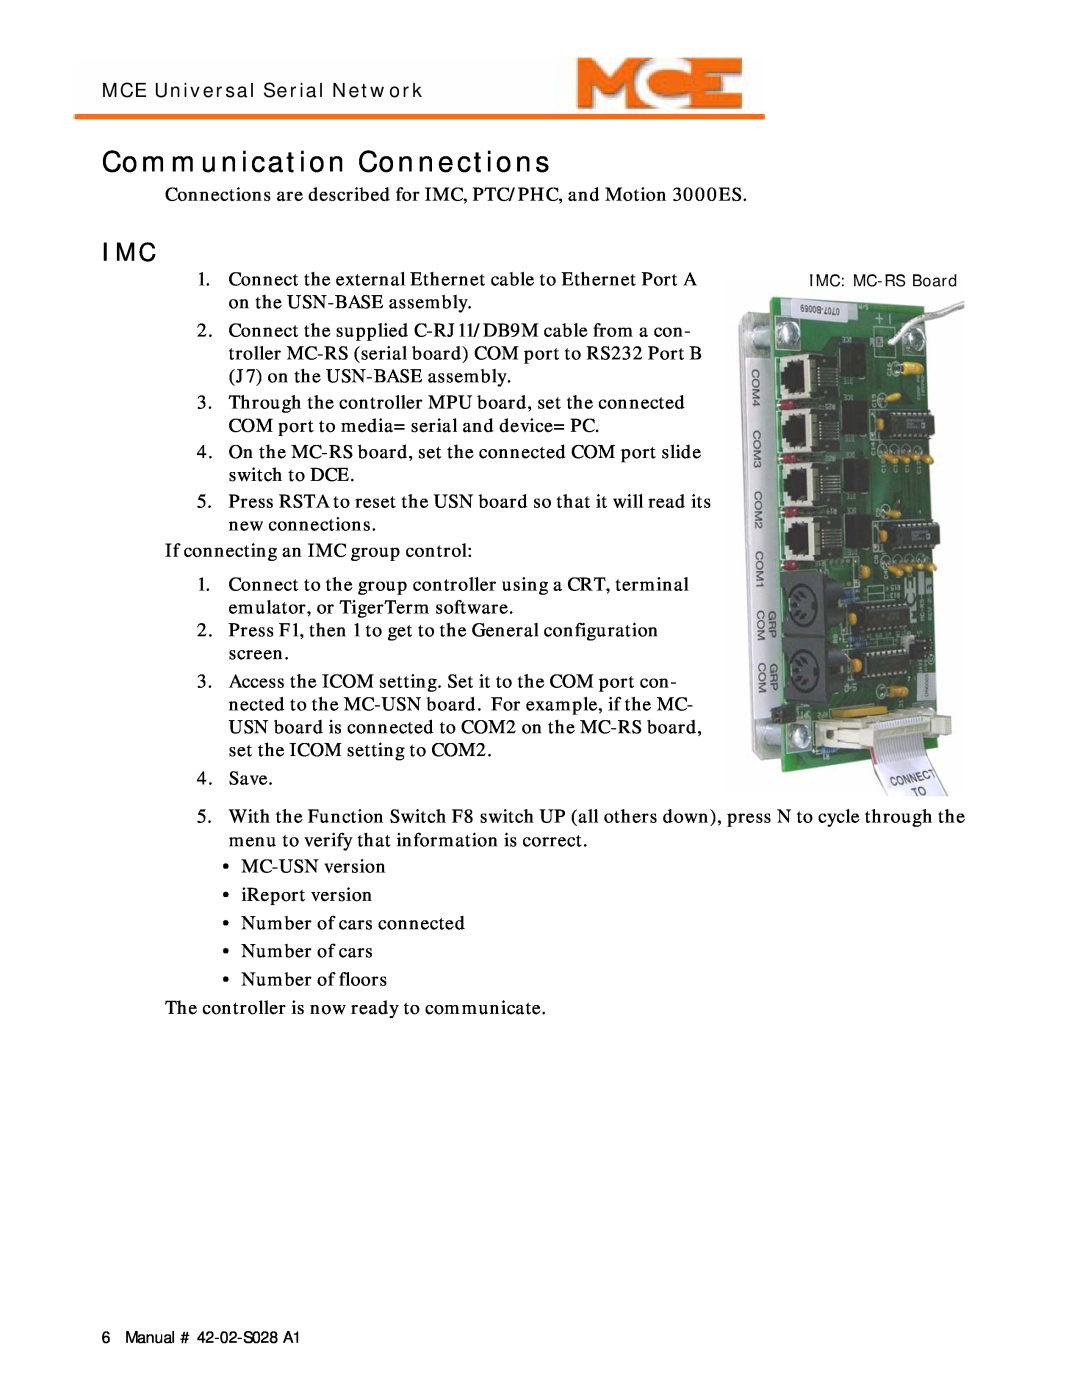 Motion 42-02-S028 manual Communication Connections, MCE Universal Serial Network 